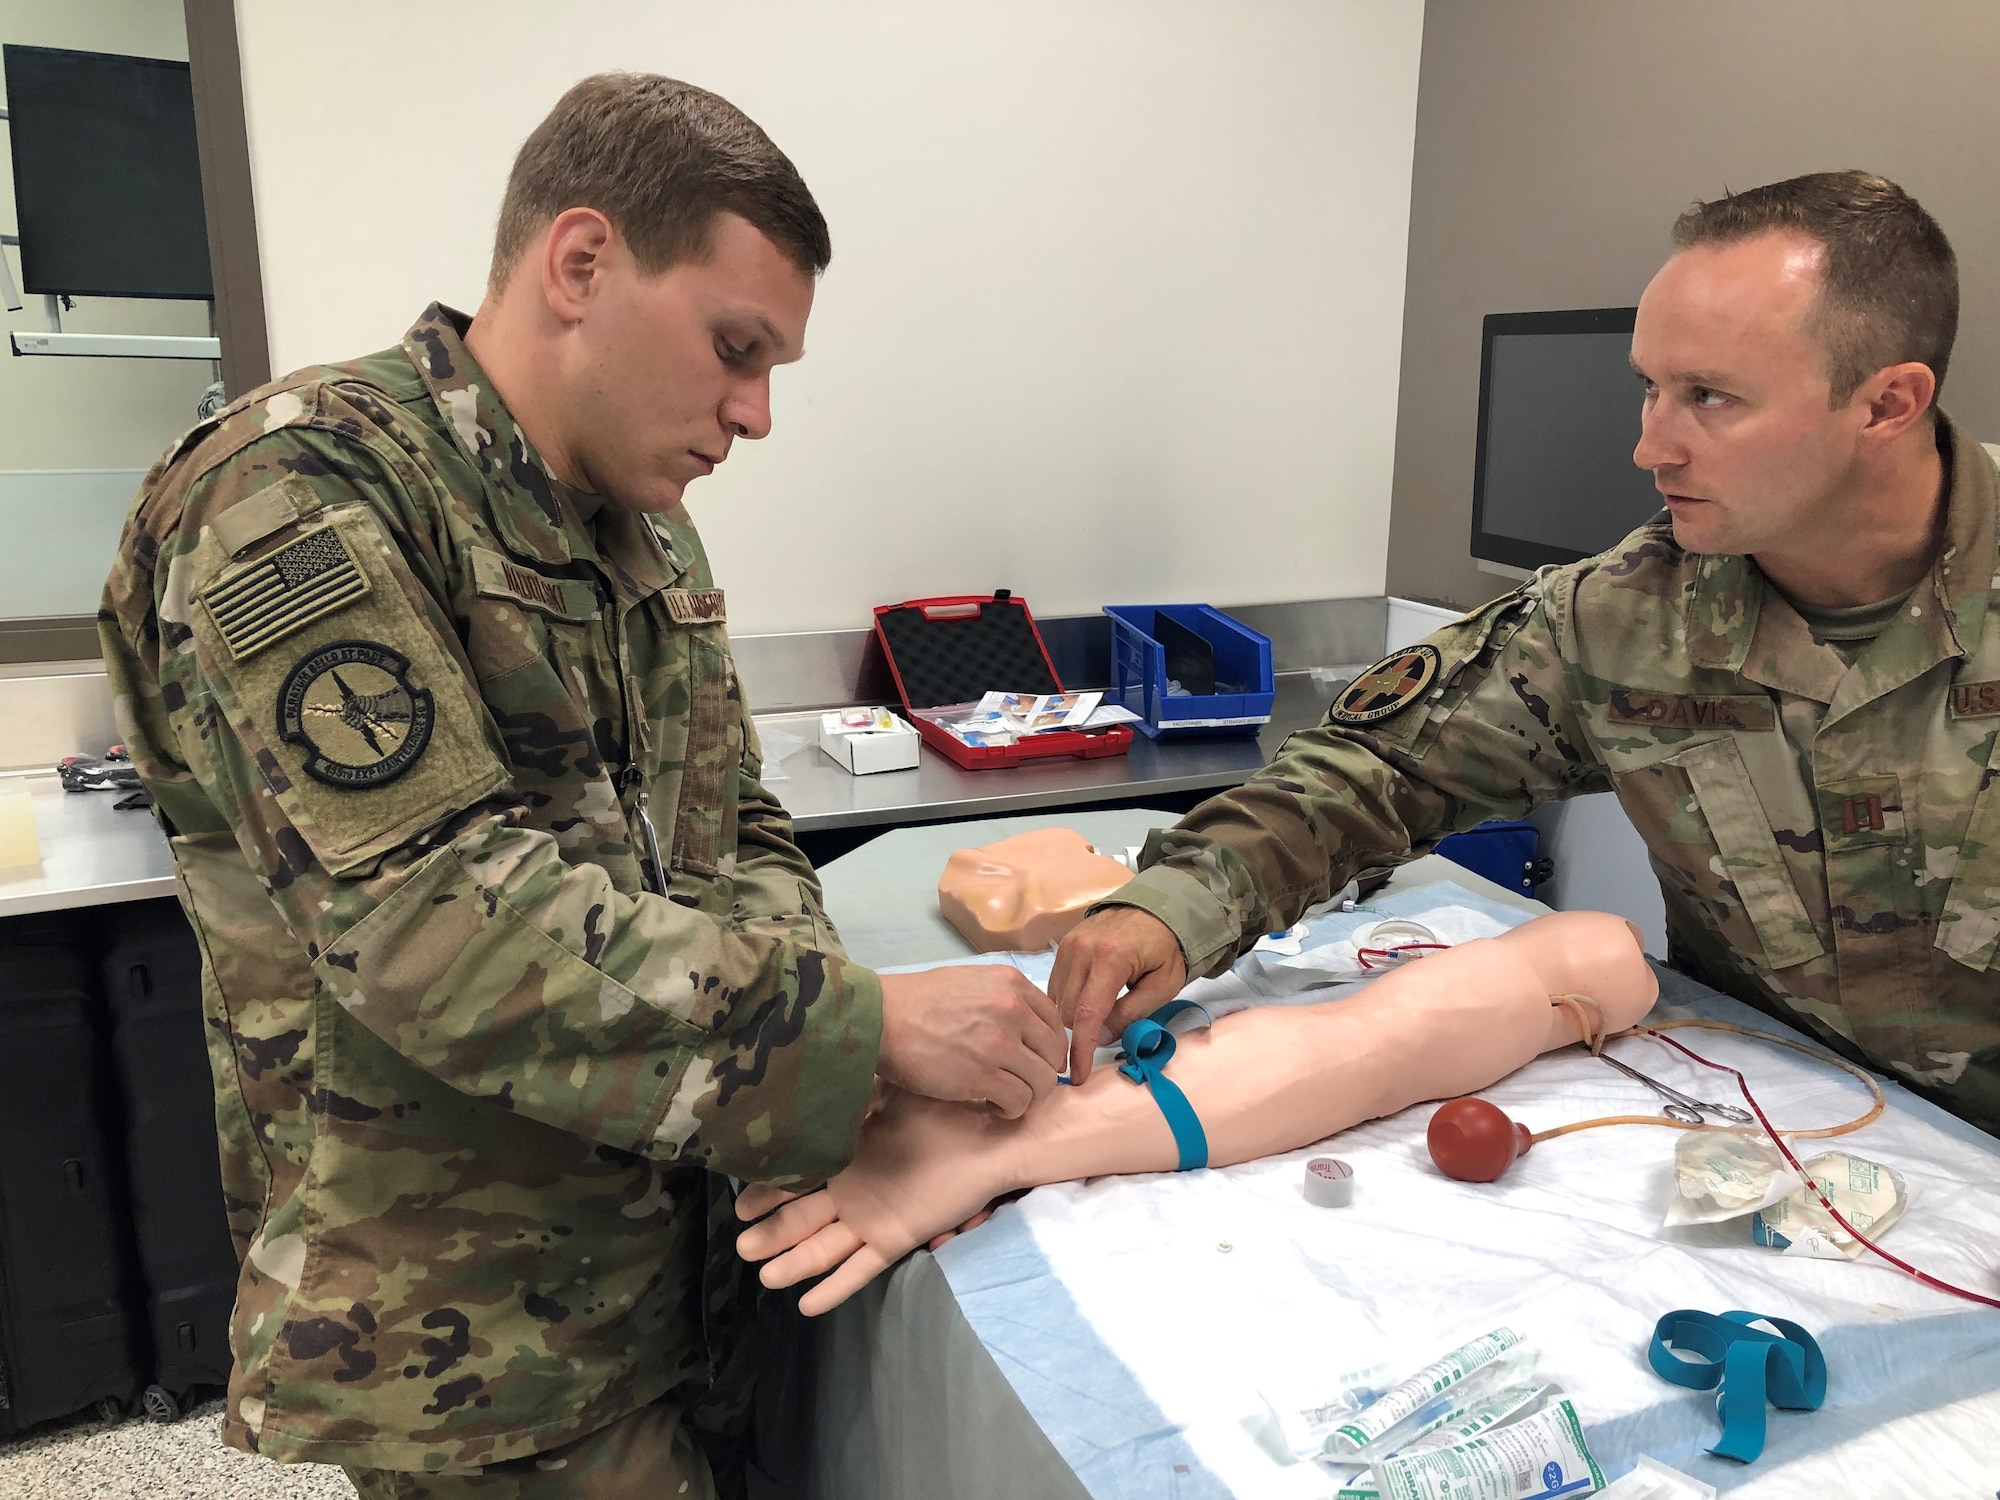 169th Medical Group trains in San Diego